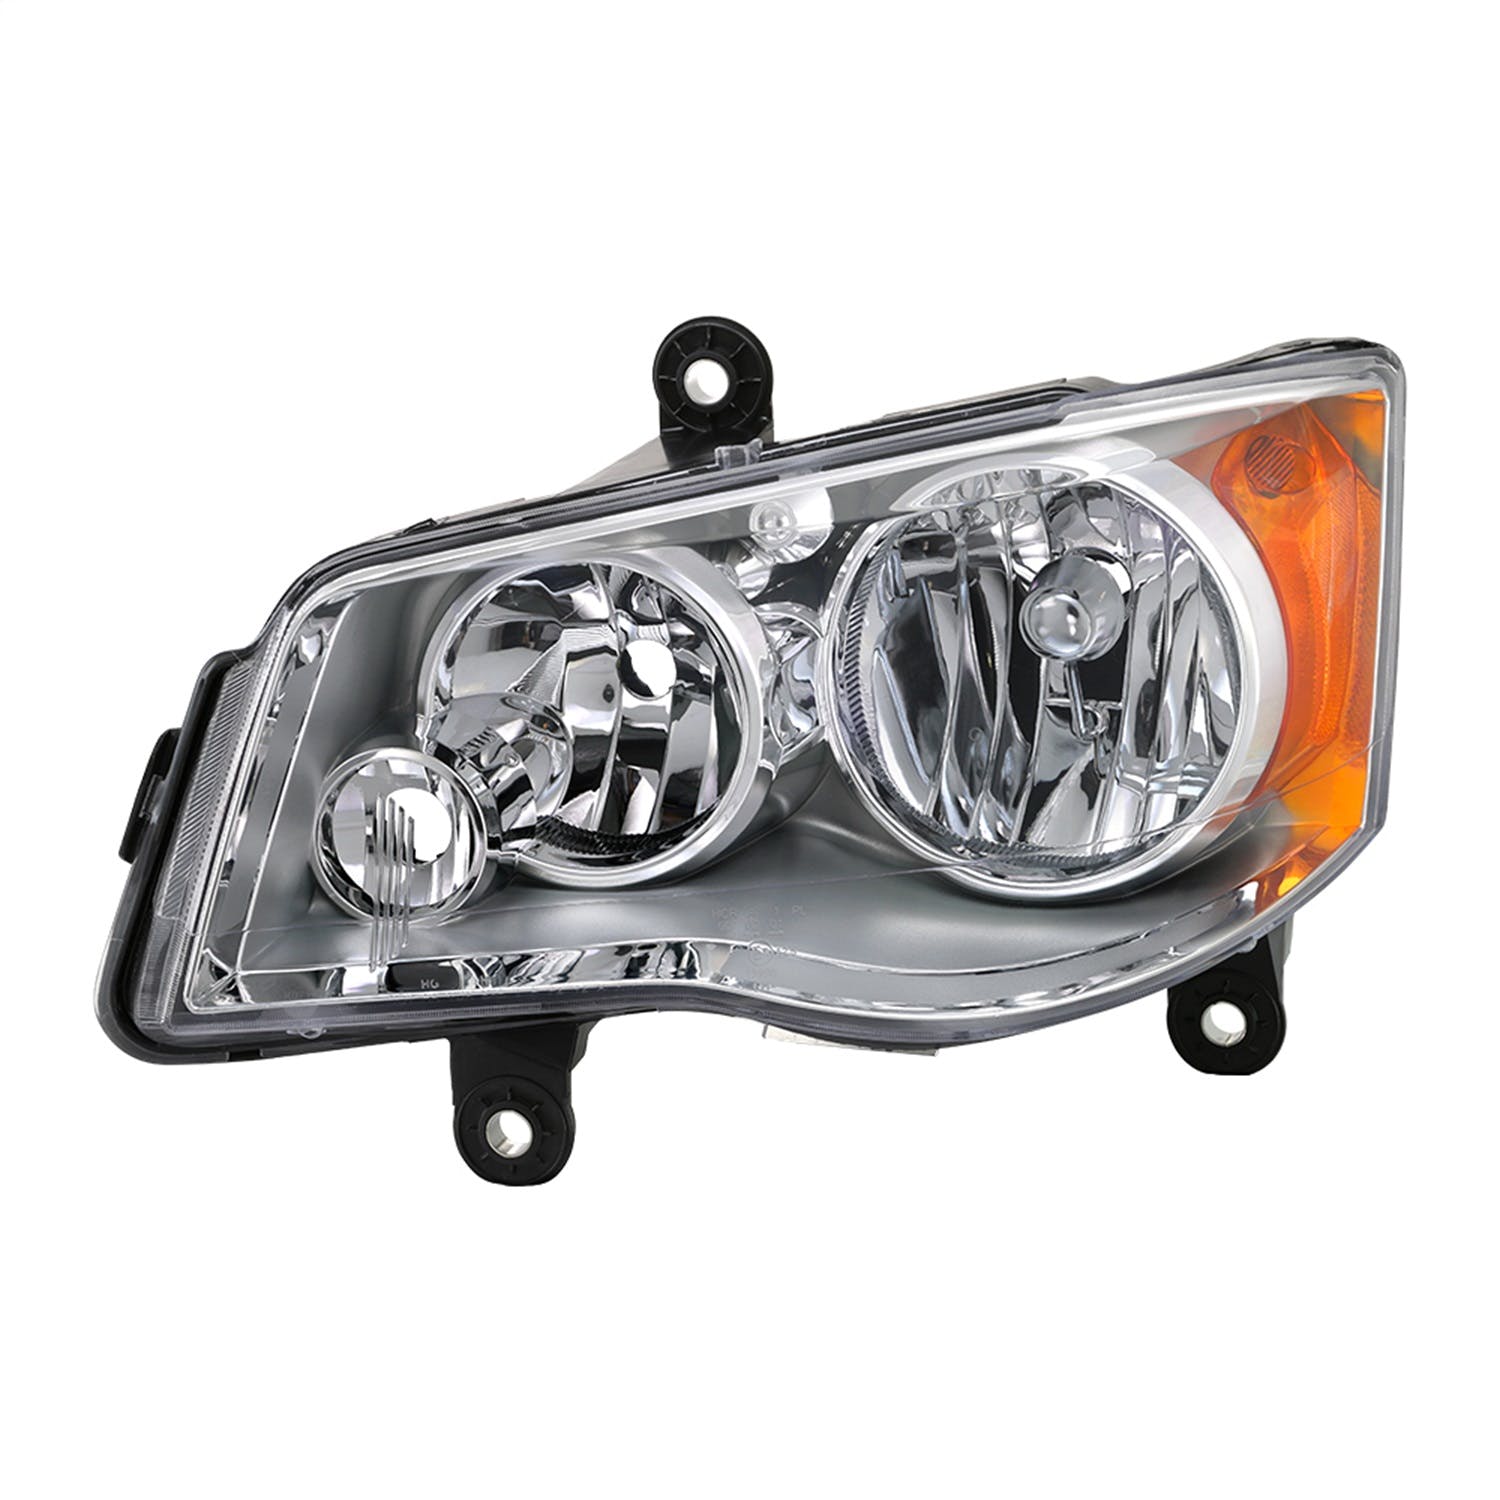 XTUNE POWER 9042515 Dodge Grand Caravan 11 17 Chrysler Town and Country 08 16 ( Does Not fit 09 10 Models with Automatic Dimming Headlights ) Driver Side Headlights OEM Left